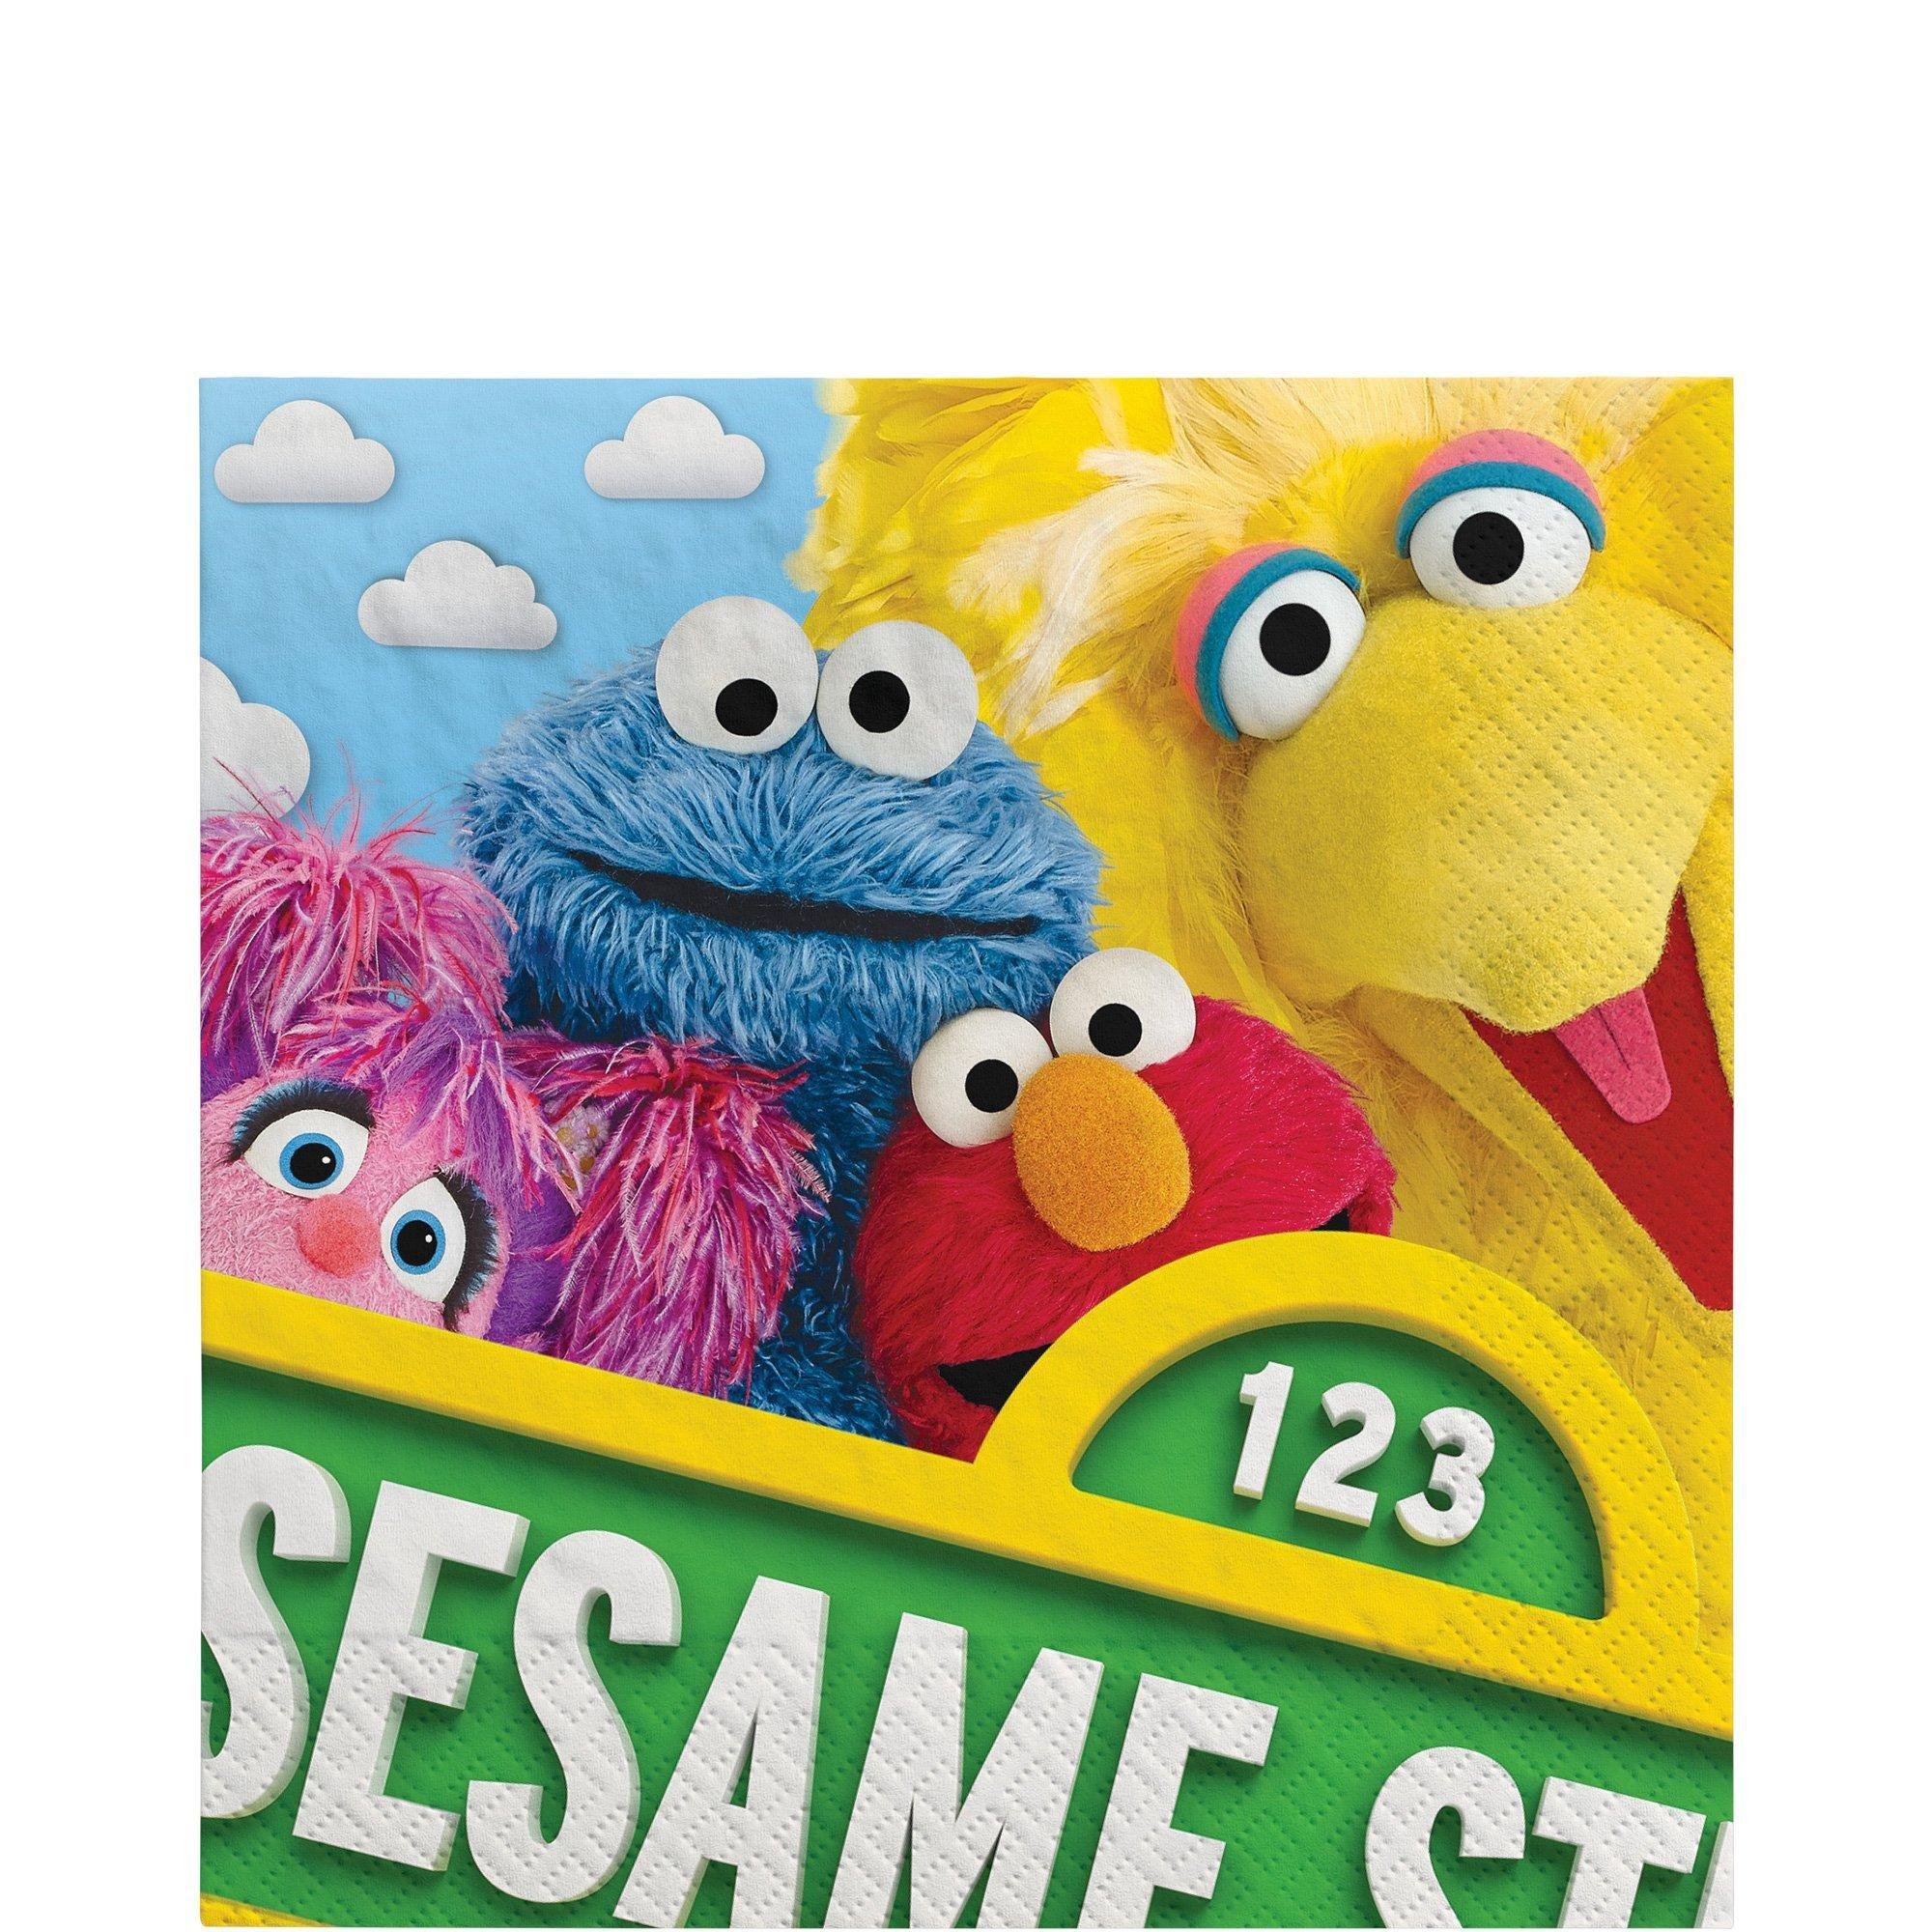 Sesame Street Birthday Party Kit for 8 - Plates, Napkins, Cups & Candles